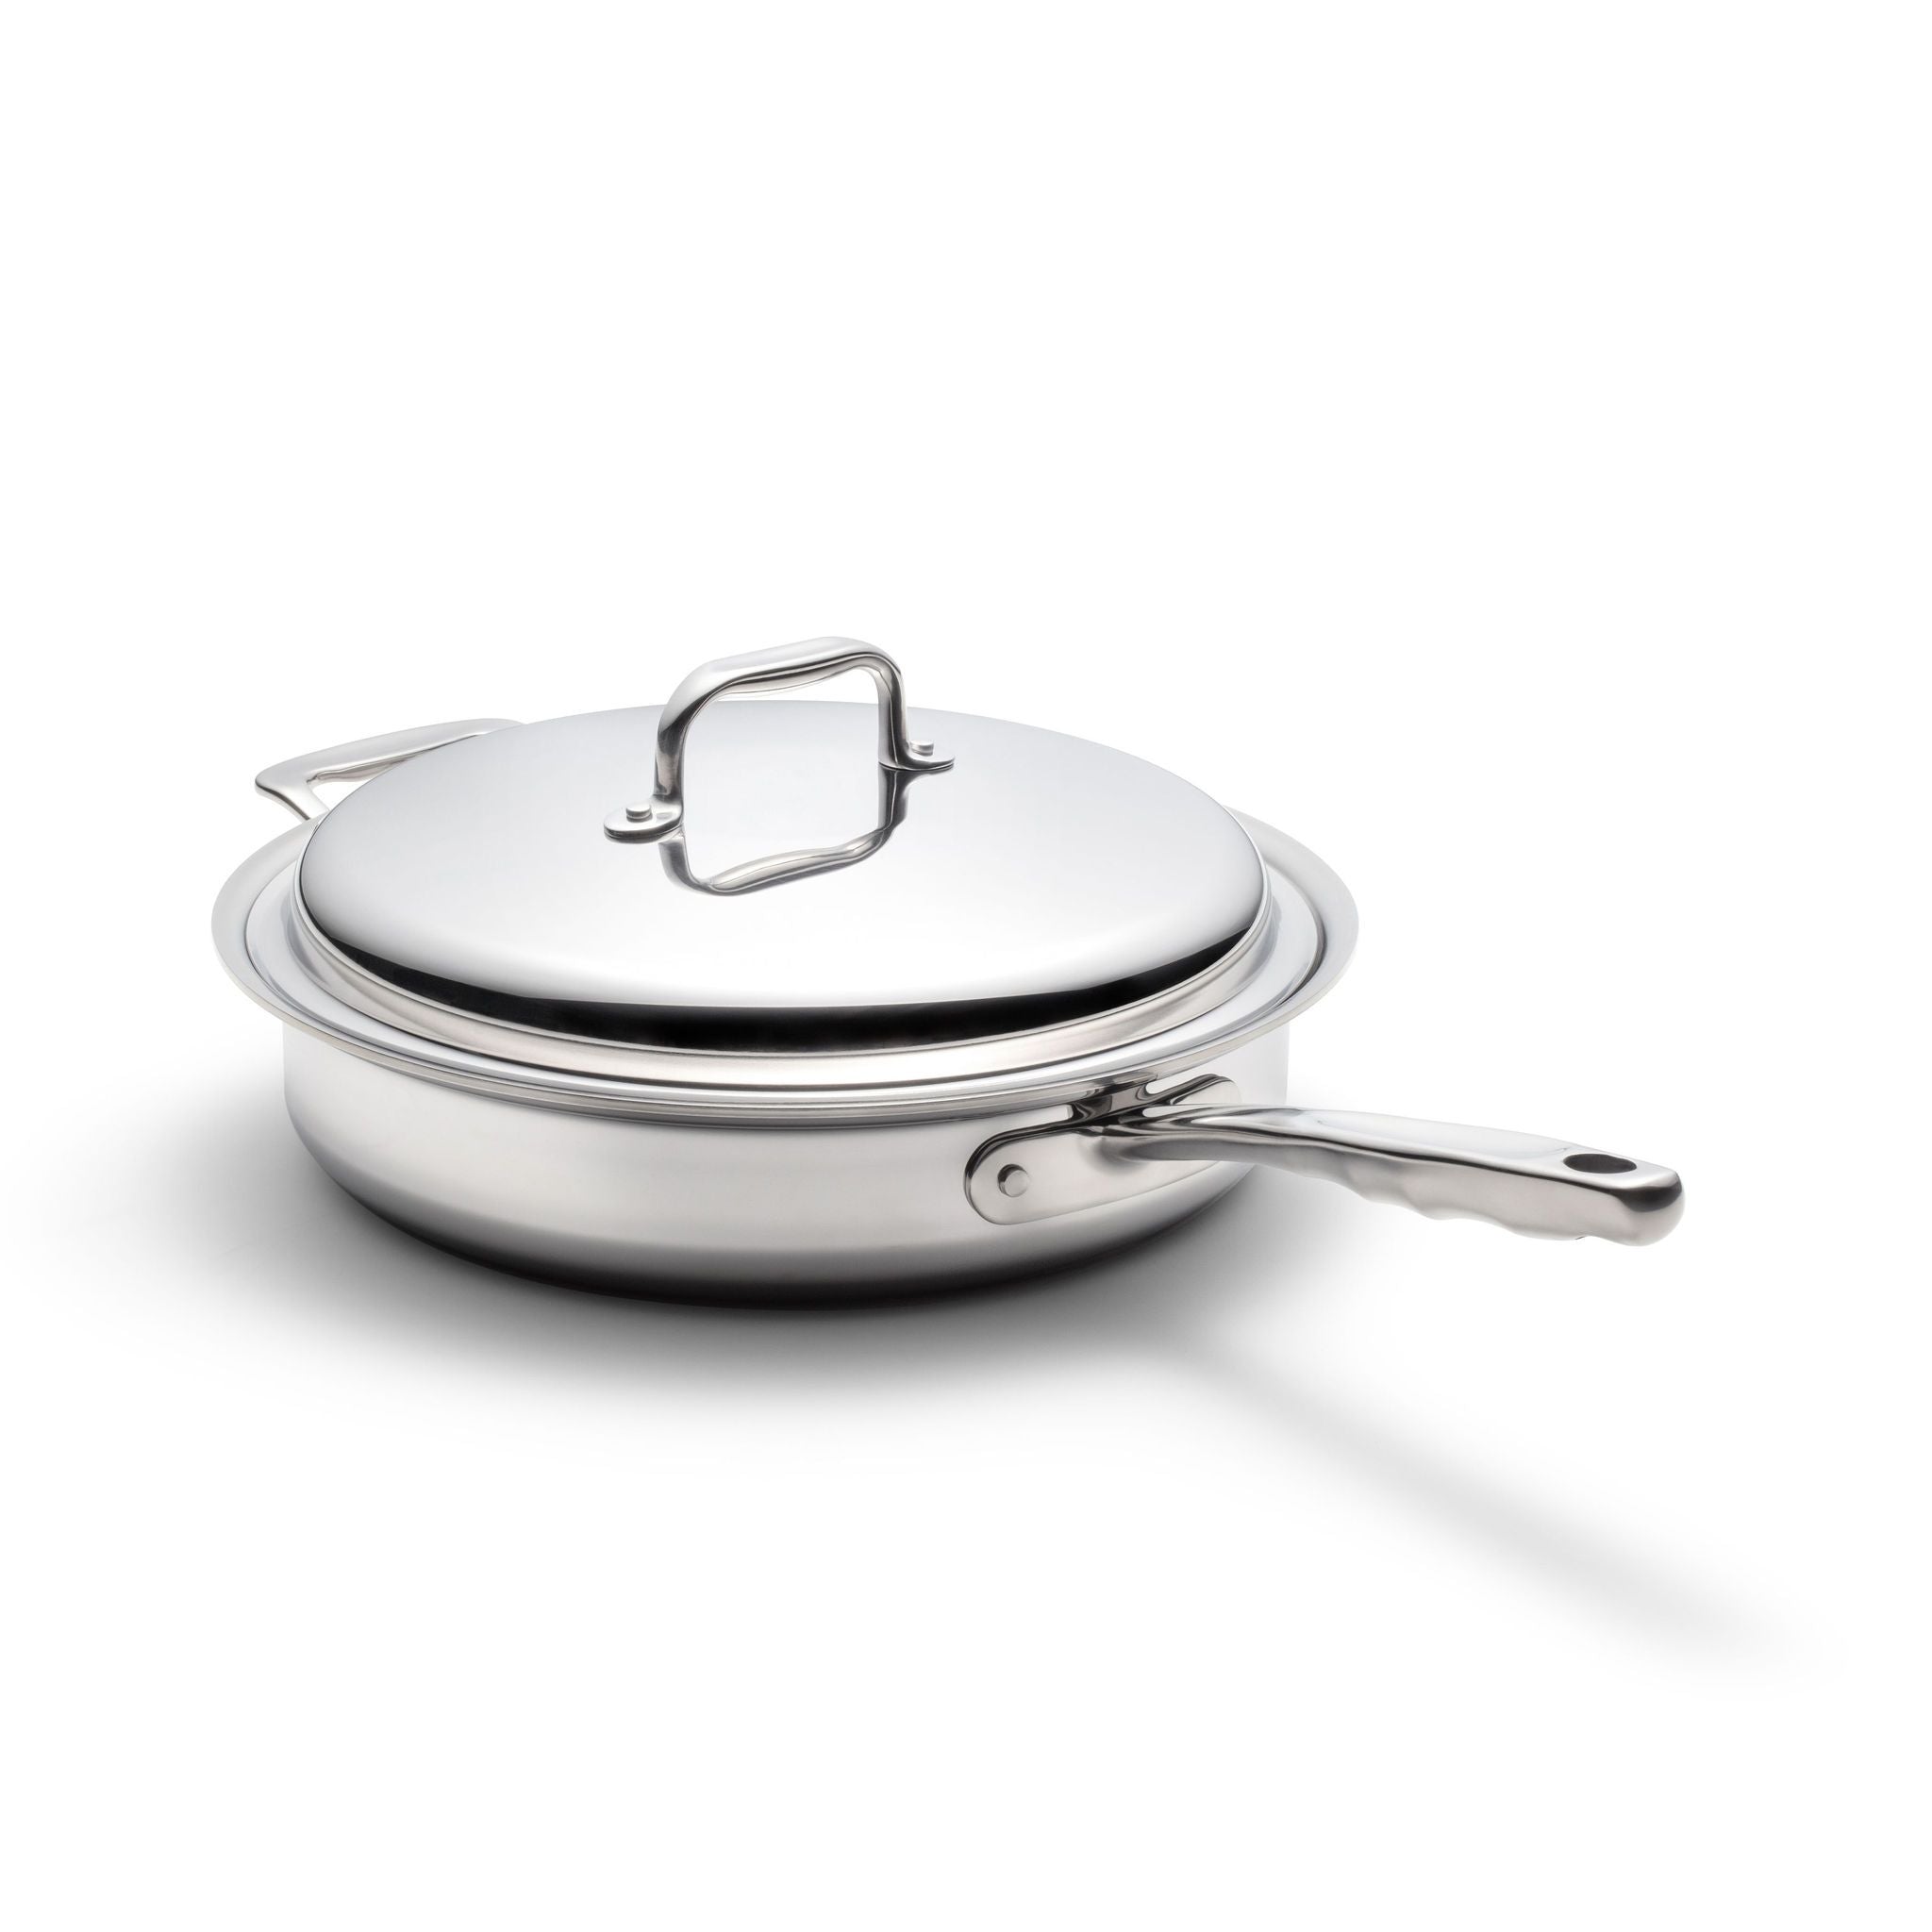  Made In Cookware - 3.5 Quart Stainless Steel Saute Pan